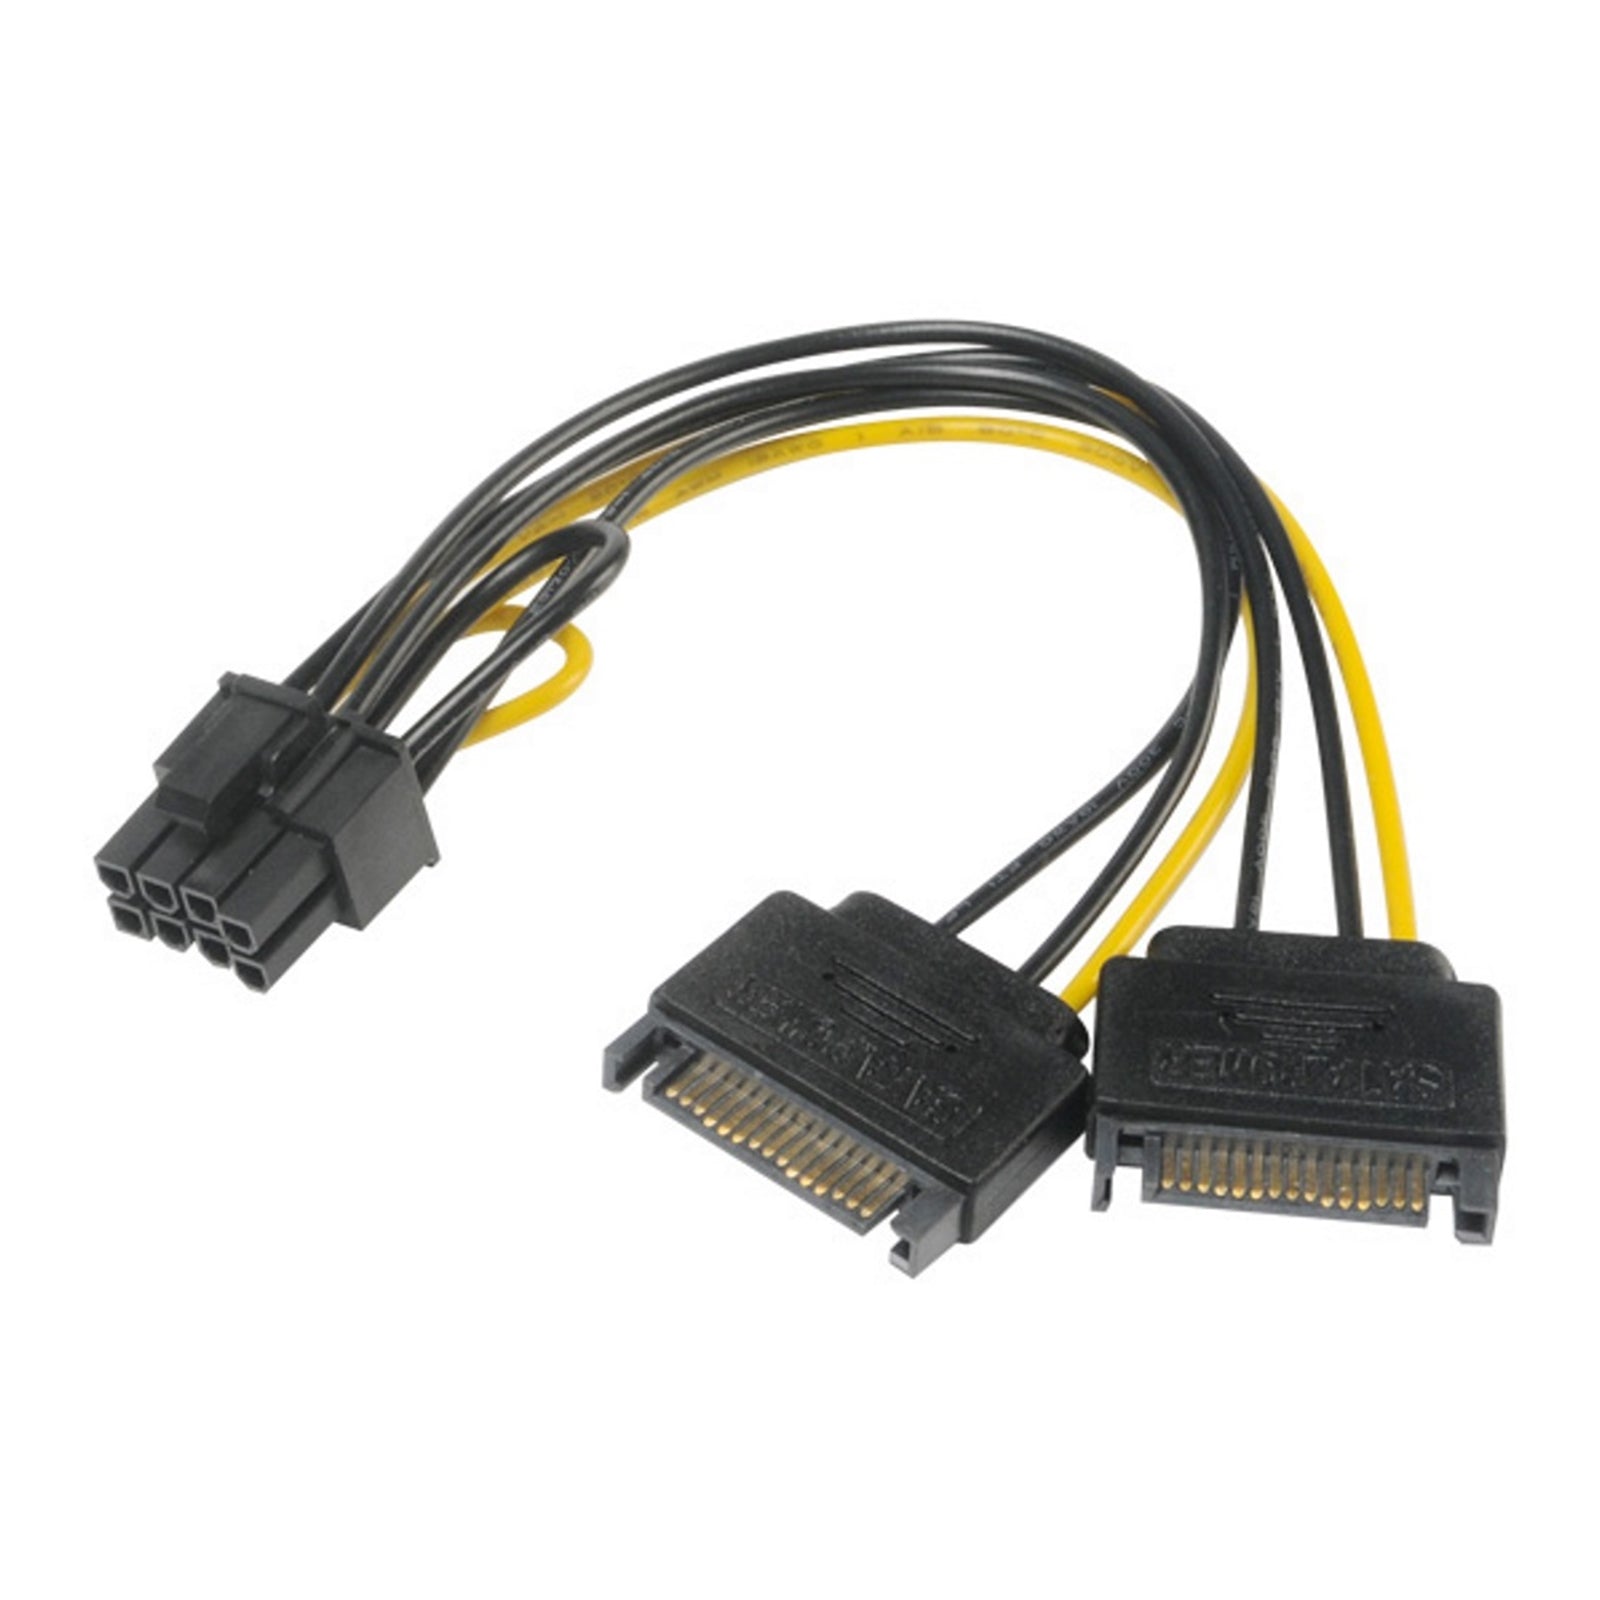 Photos - Cable (video, audio, USB) Akasa 6+2 Pin PCIe (M) to 2 x SATA Power  Adapter Cable CLAKA (M + M)